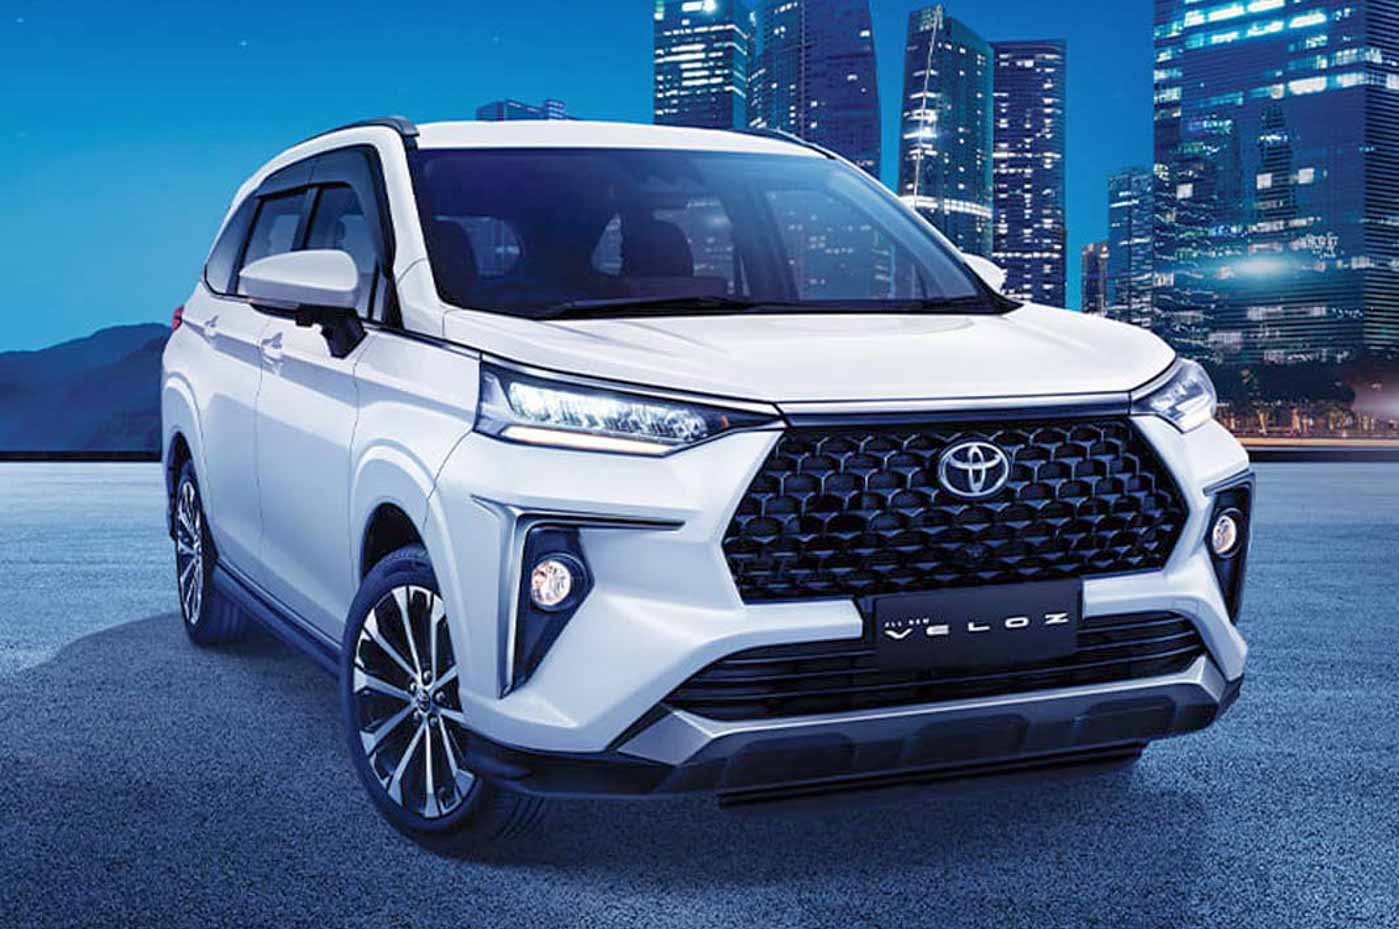 Toyota Taisor Could Be The Name Of Upcoming Toyota Midsize MPV